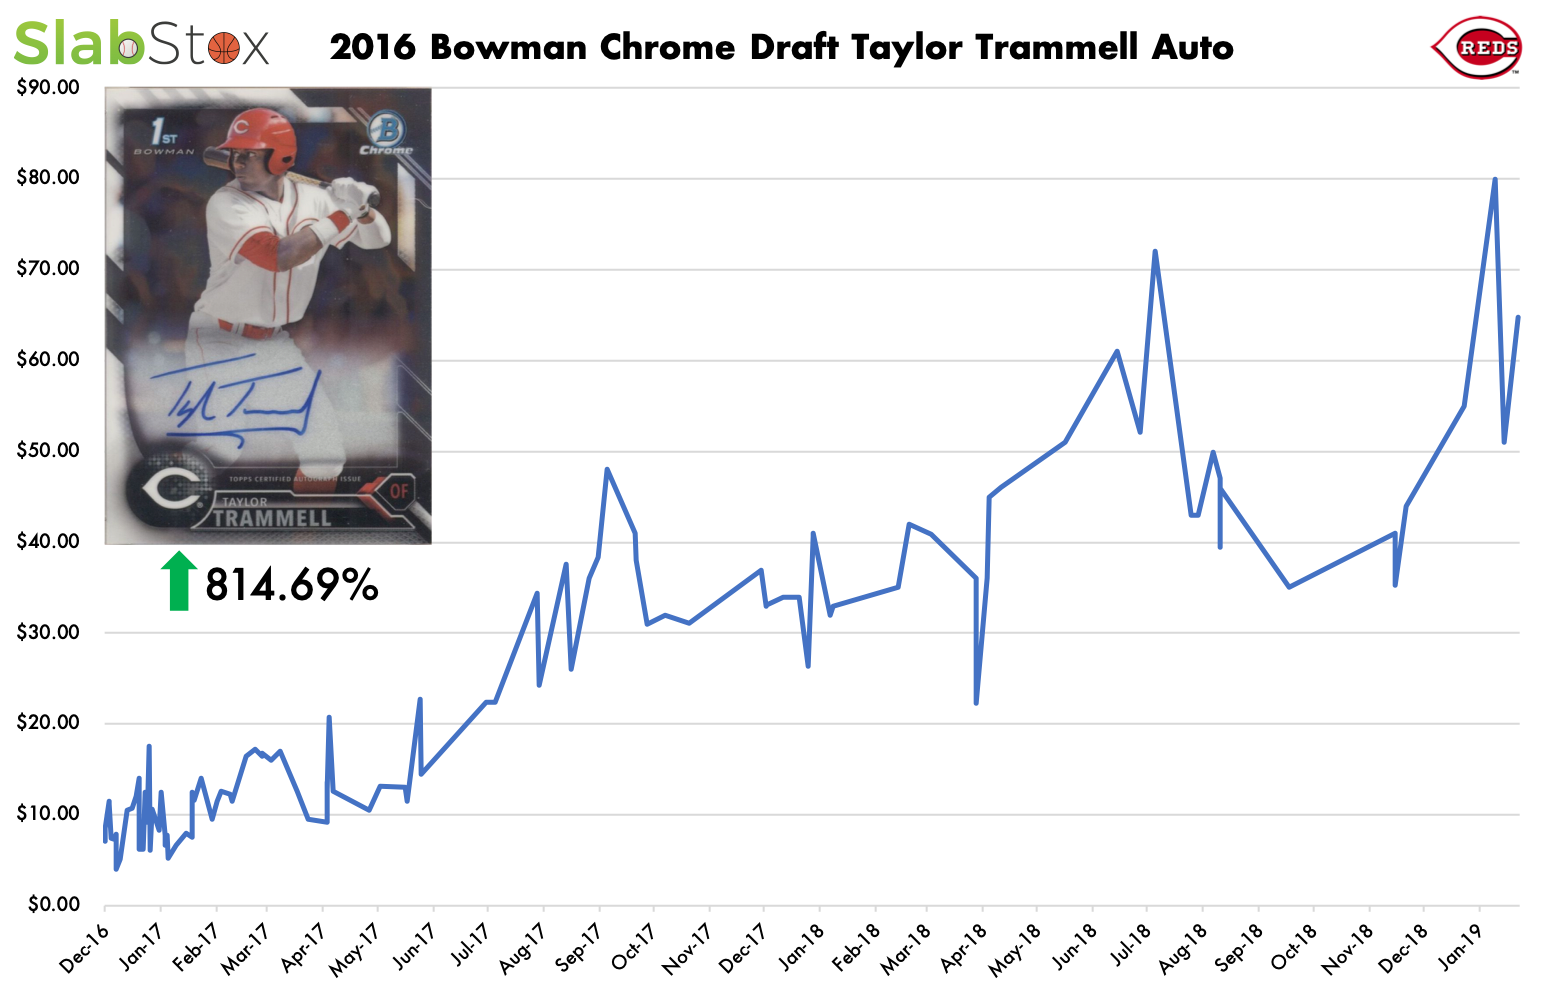 SlabStox infographic for 2016 Bowman Chrome Draft Taylor Trammell Auto sports trading card